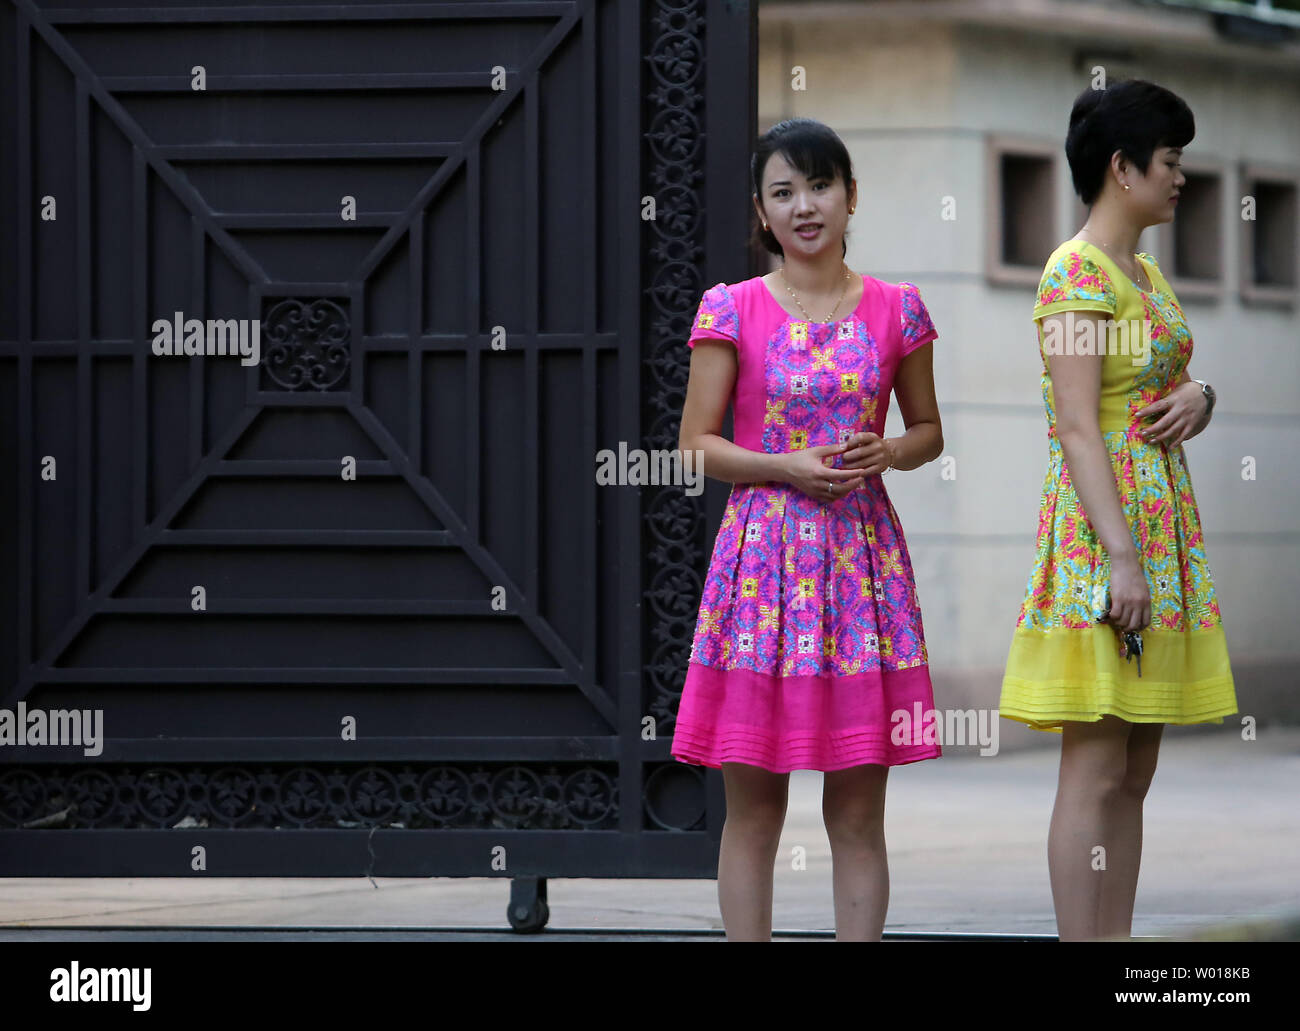 North Korean women wait for a delivery at their embassy in Beijing on August 26, 2015.  Despite China being North Korea's lifeline regarding energy, food and international diplomacy, North Korean leader Kim Jong Un declined an invitation to a attend a military parade commemorating China's victory over Japan during World War II.  The snub was announced amid escalating military tensions between North and South Korea.    Photo by Stephen Shaver/UPI Stock Photo